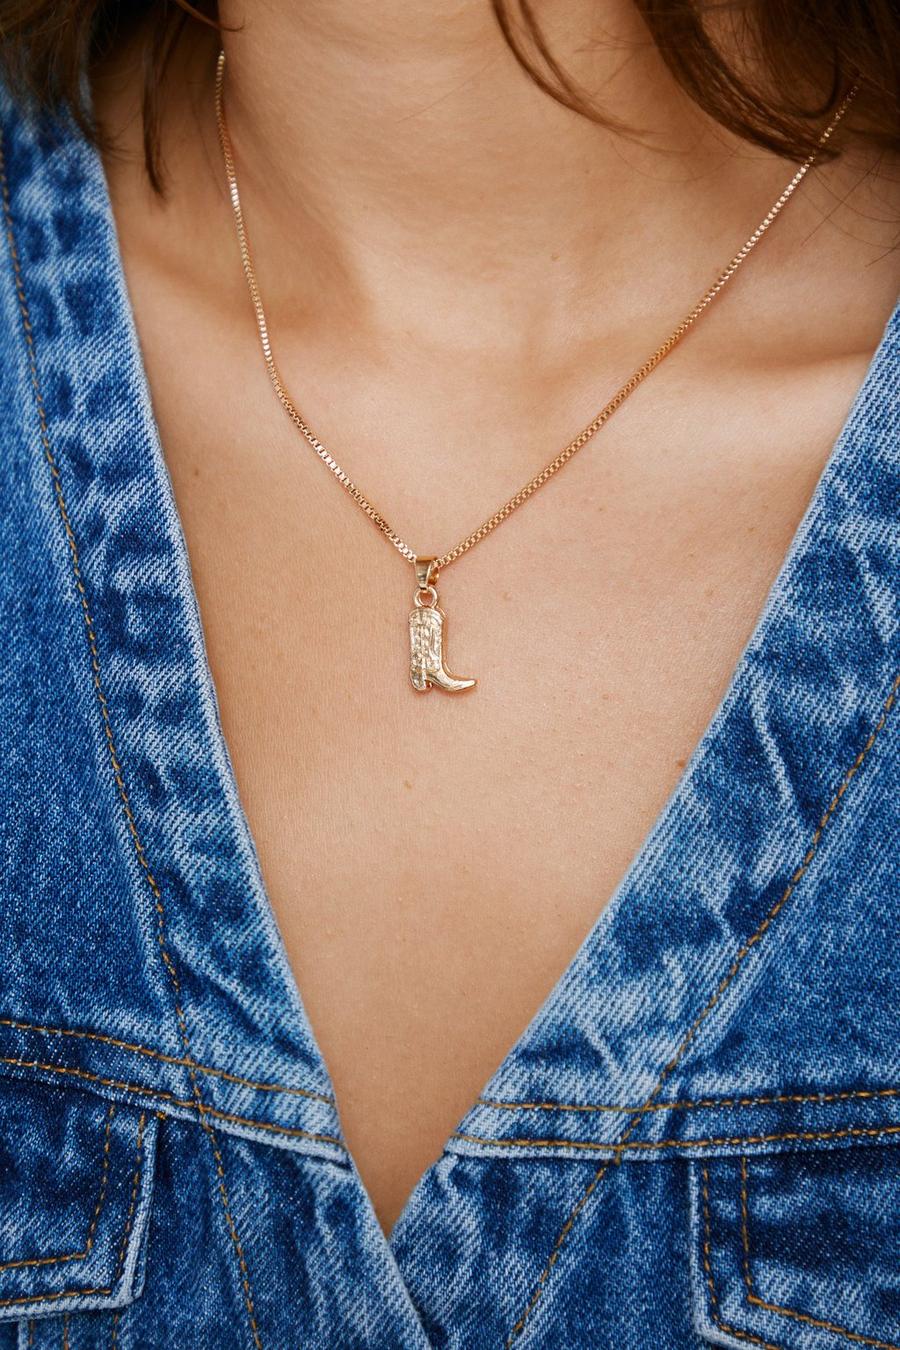 Western Boot Pendant Necklace